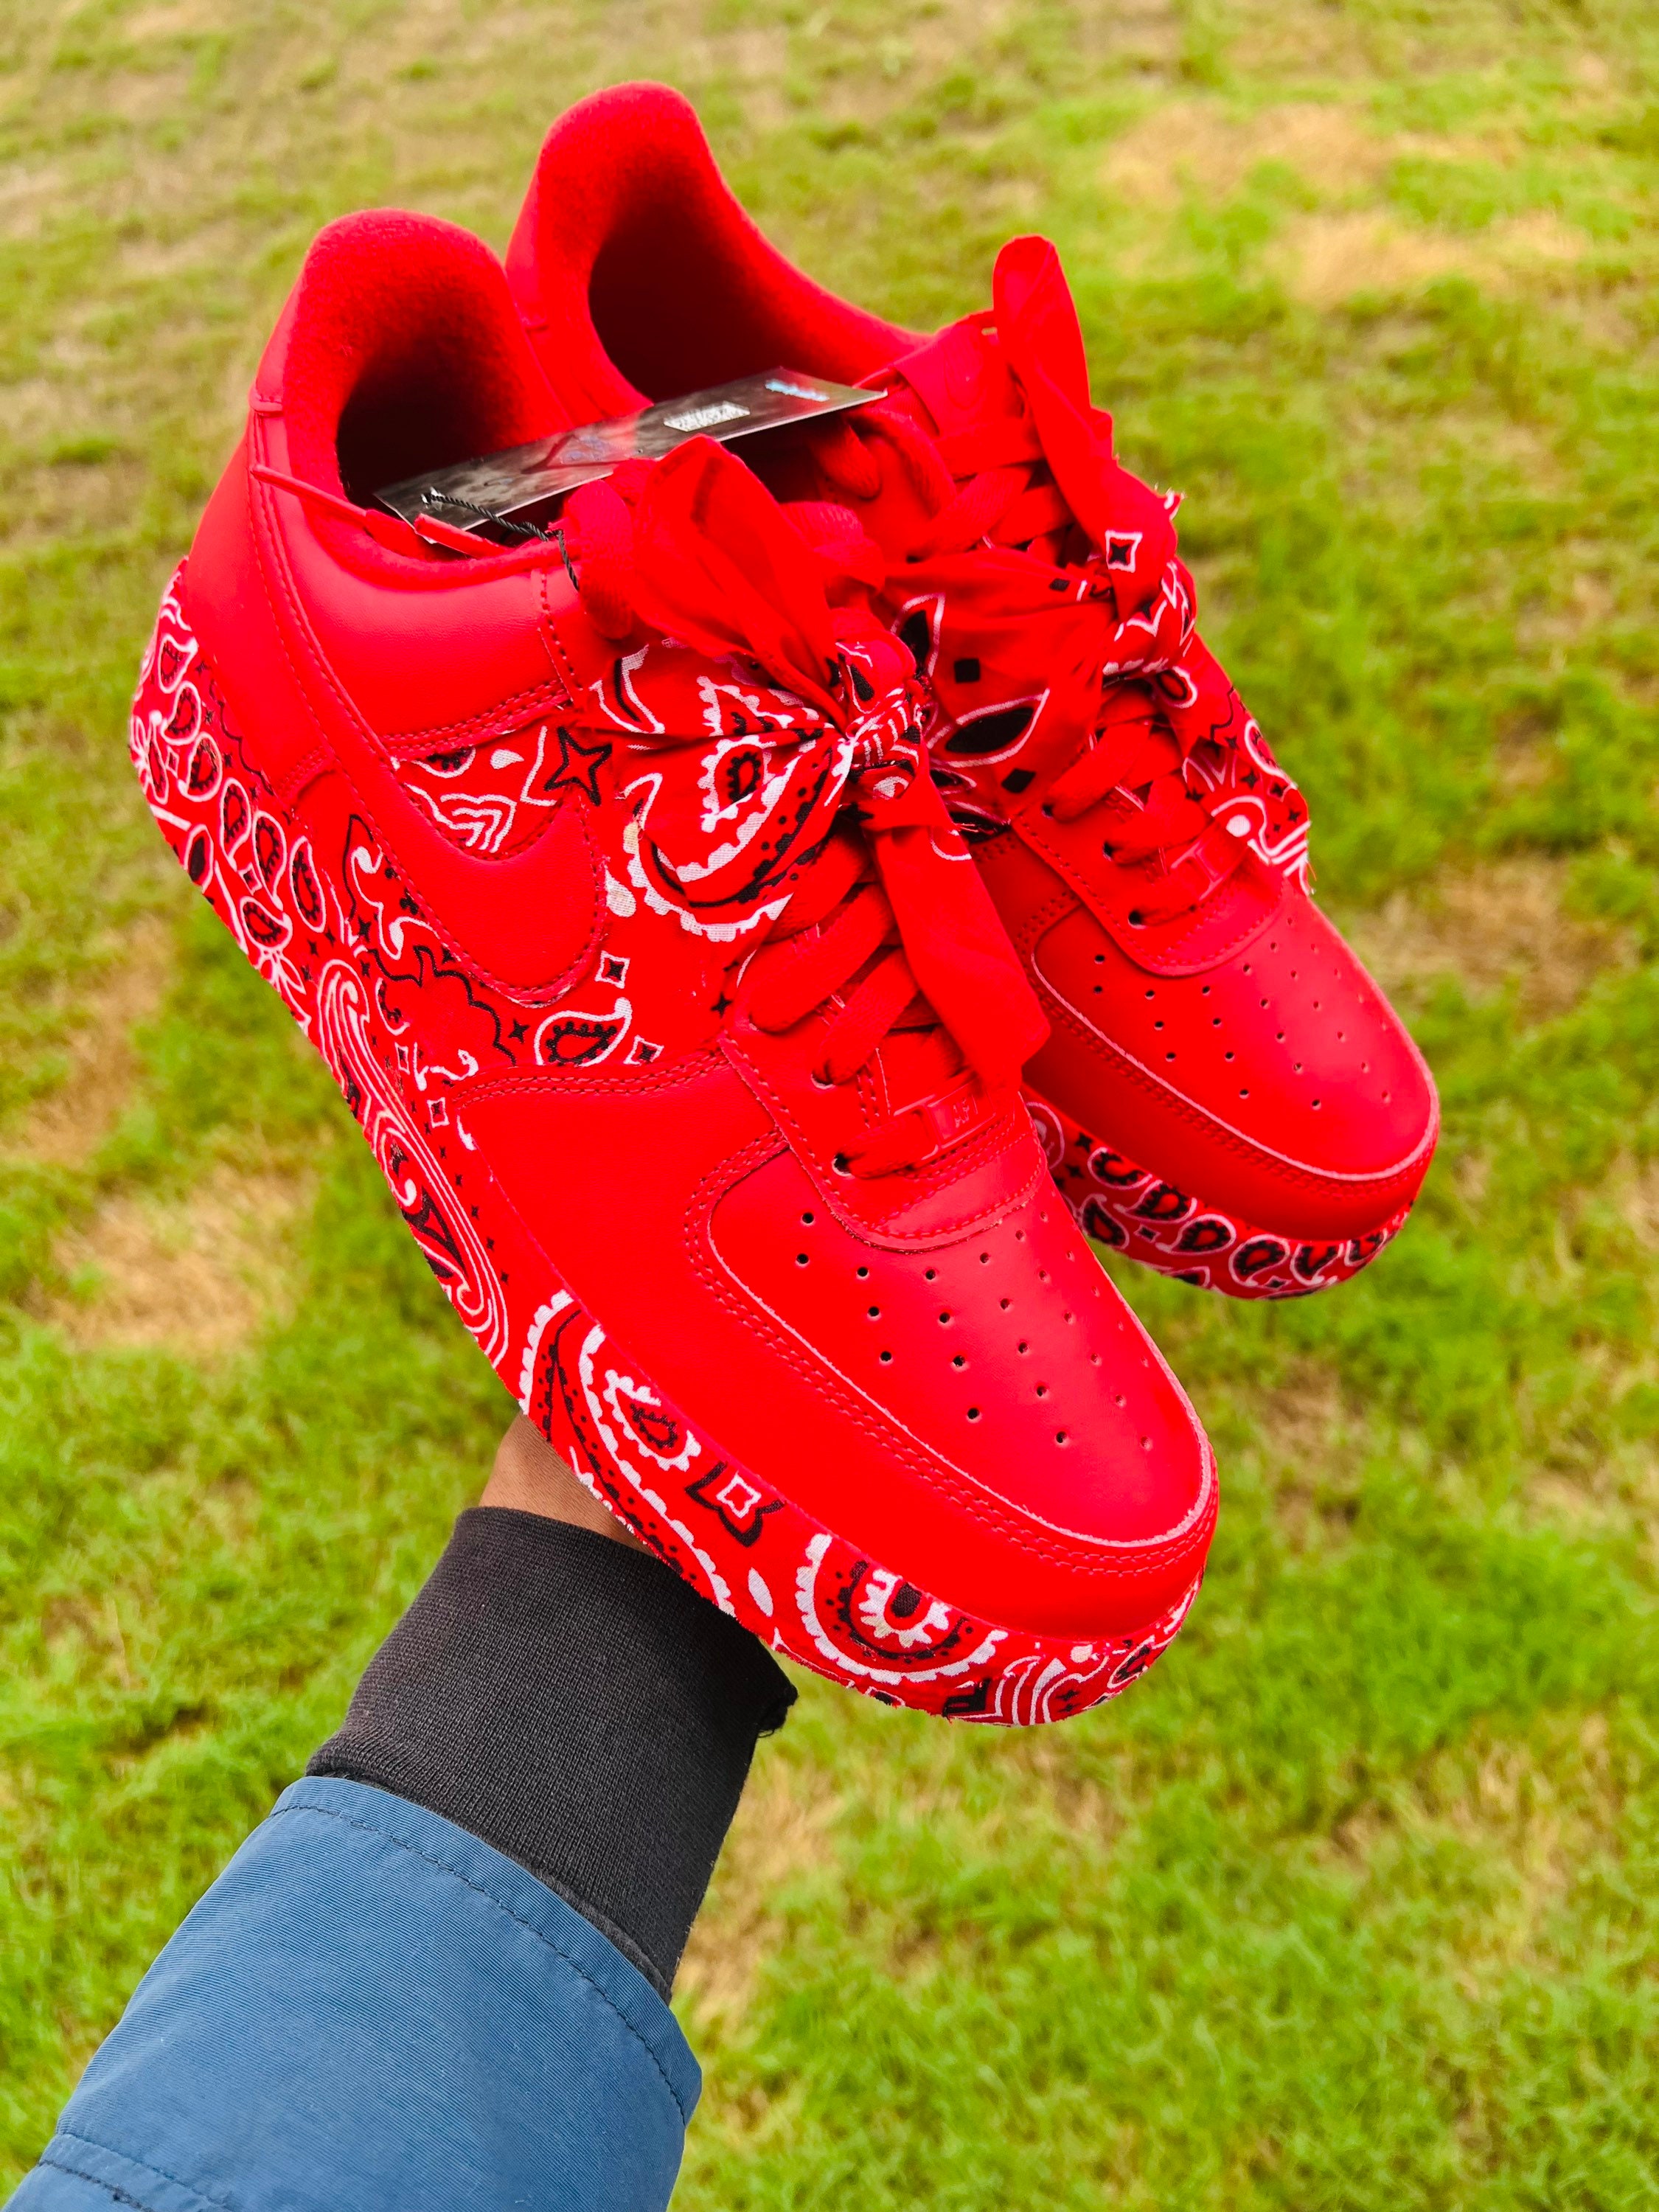 Red Nike Air Force 1 customsred & white Nike Air Force ones 